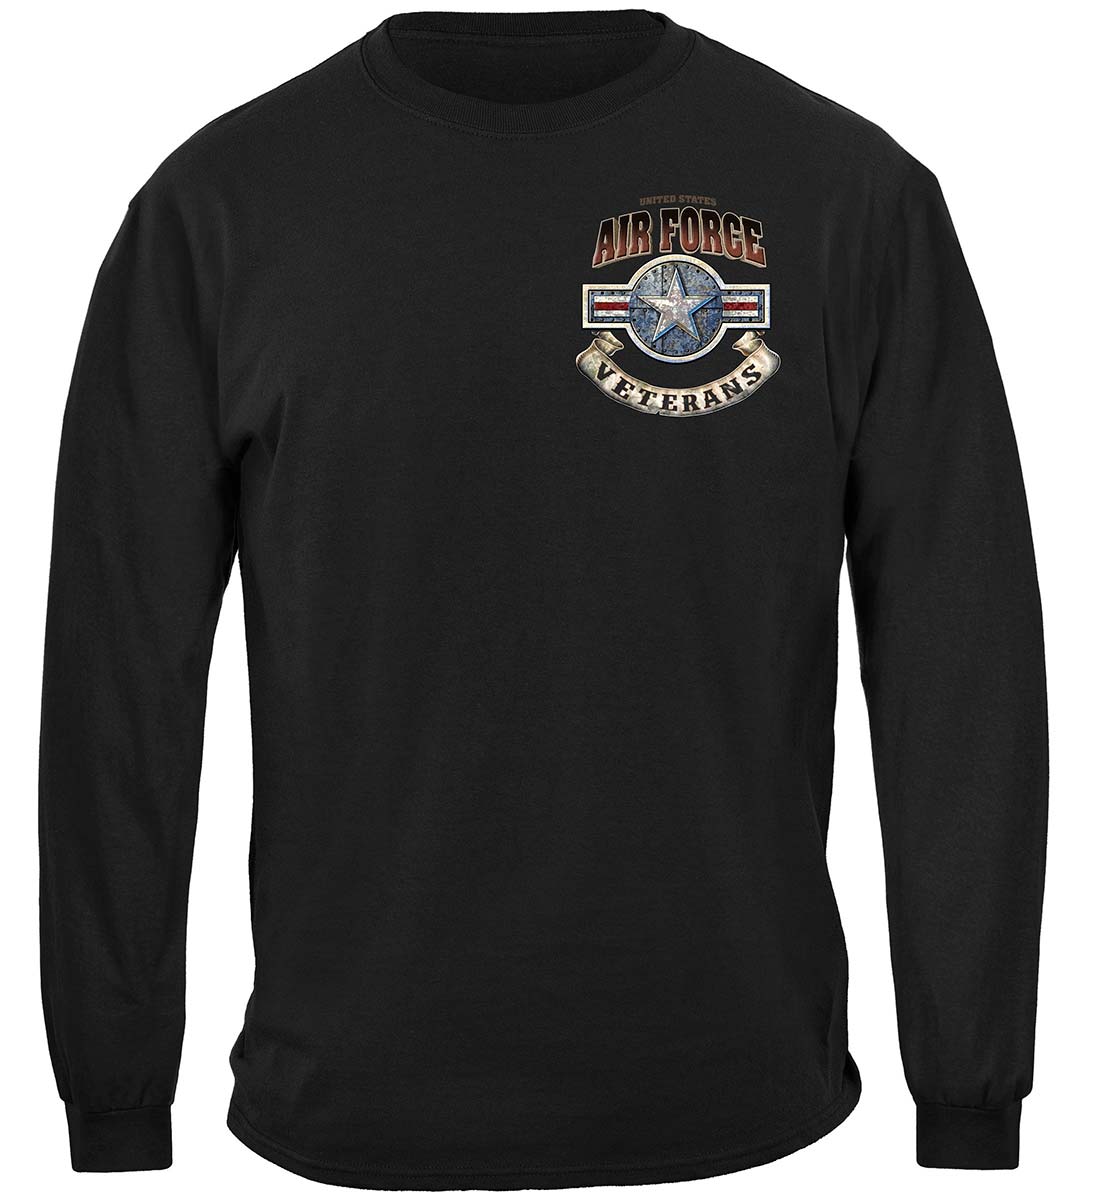 Air Force Proud To Have Served Premium Long Sleeves